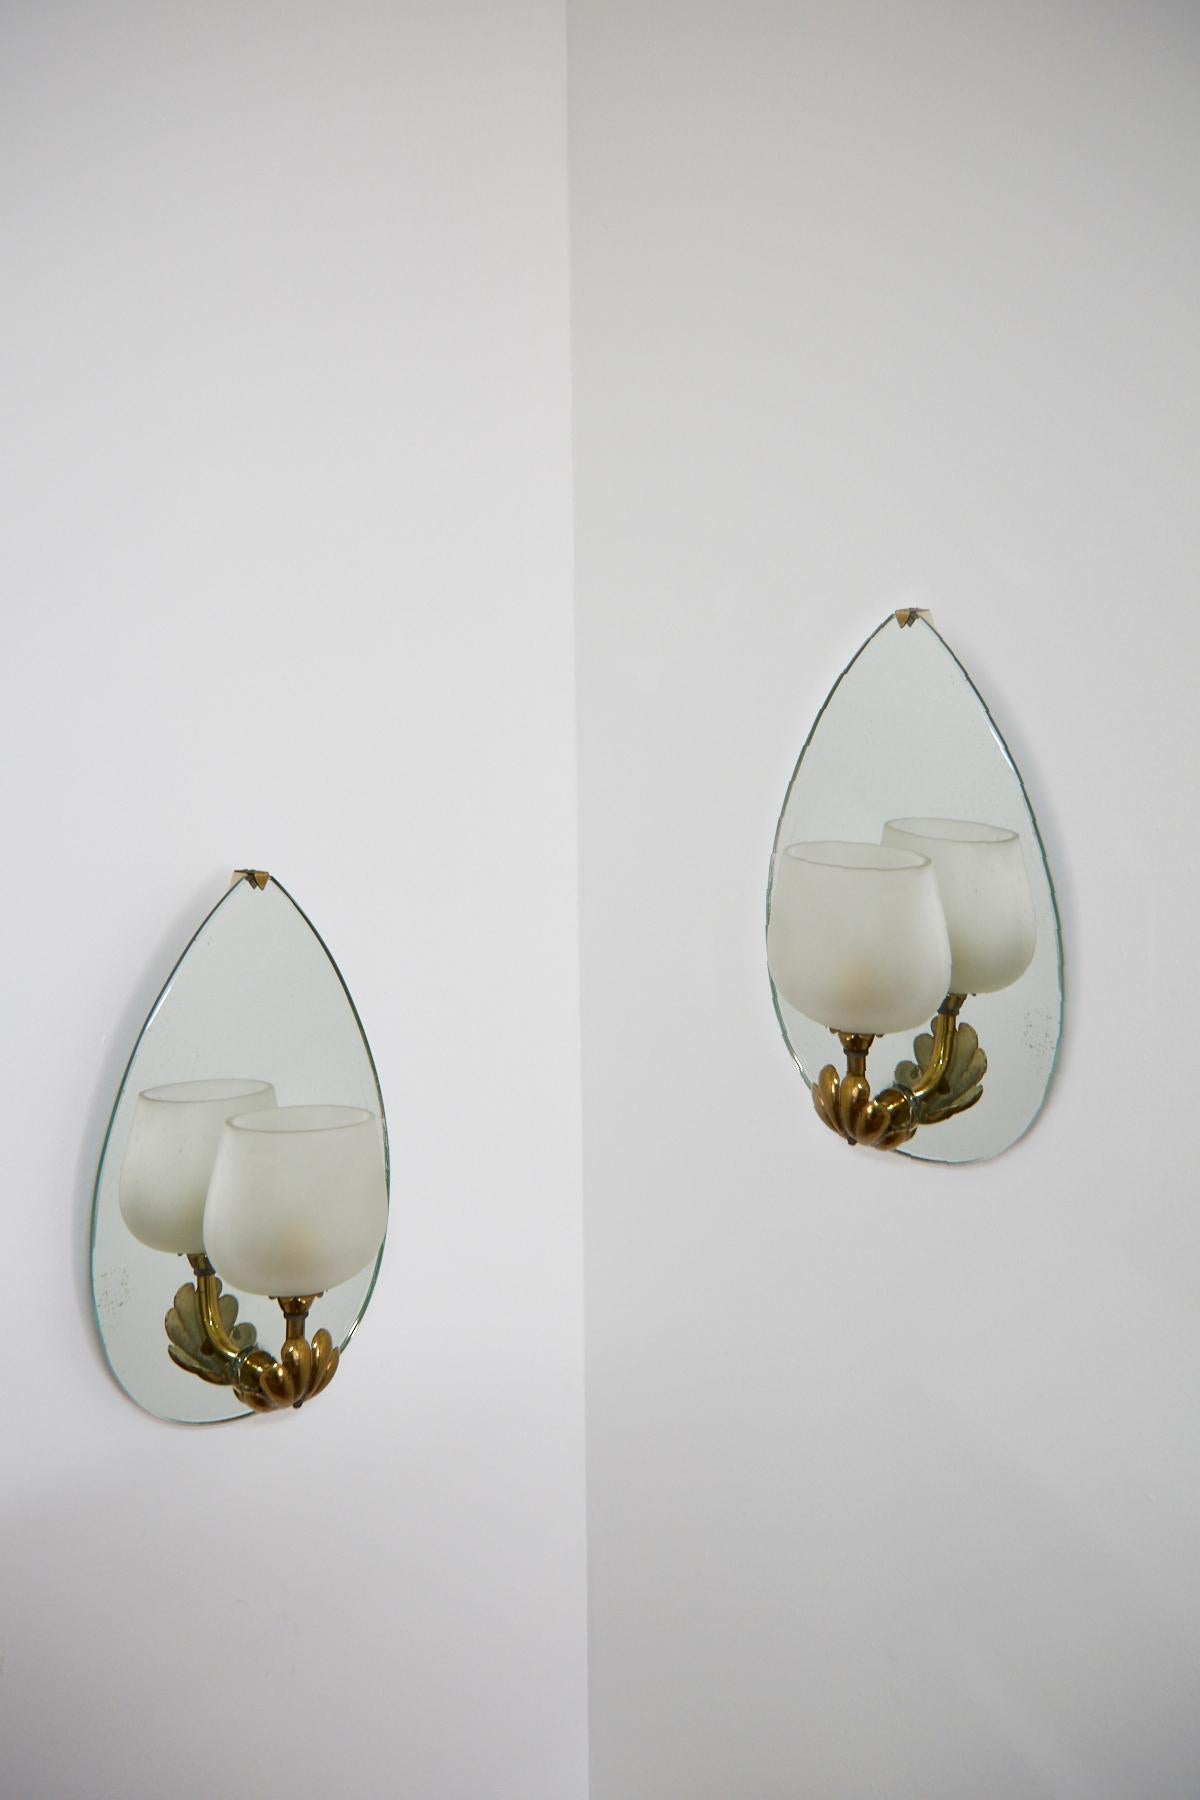 Elegant vintage pair of mirror-backed sconces in tear drop form, with a brass acanthus-covered arm supporting a frosted glass shade. Design by Pietro Chiesa and produced by Luigi Fontana. In working condition and hard-wired.